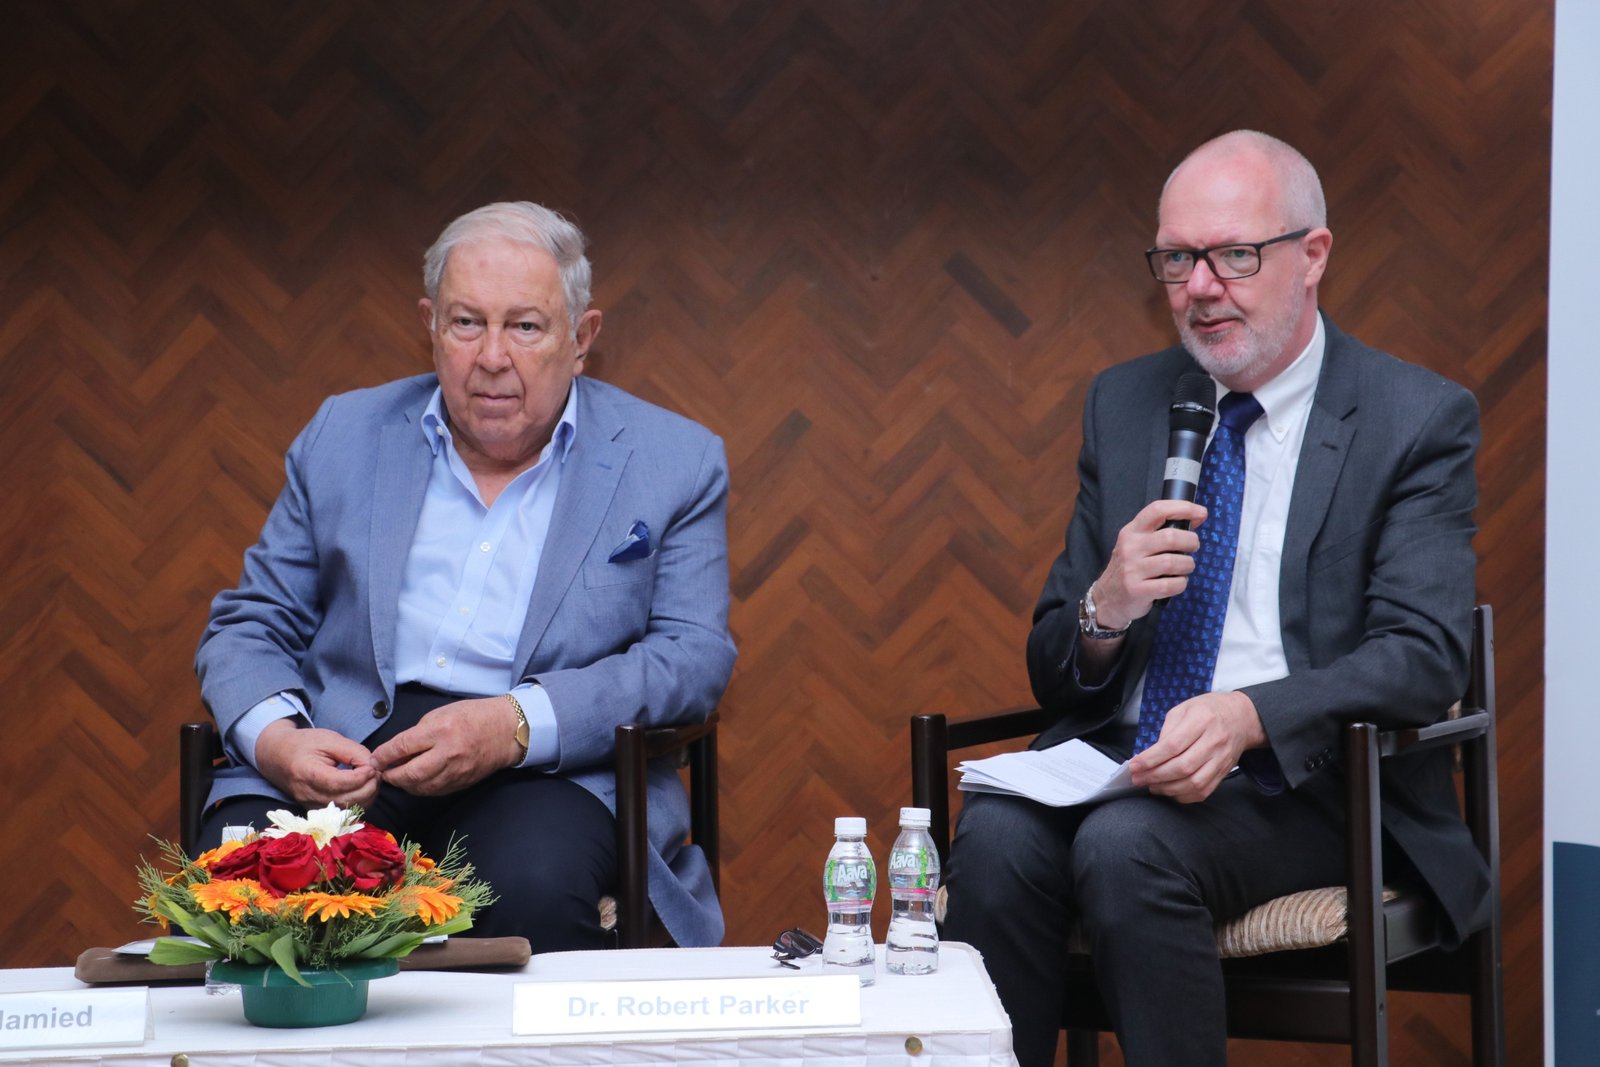 (L to R): Dr. Yusuf Hamied and Dr. Robert Parker